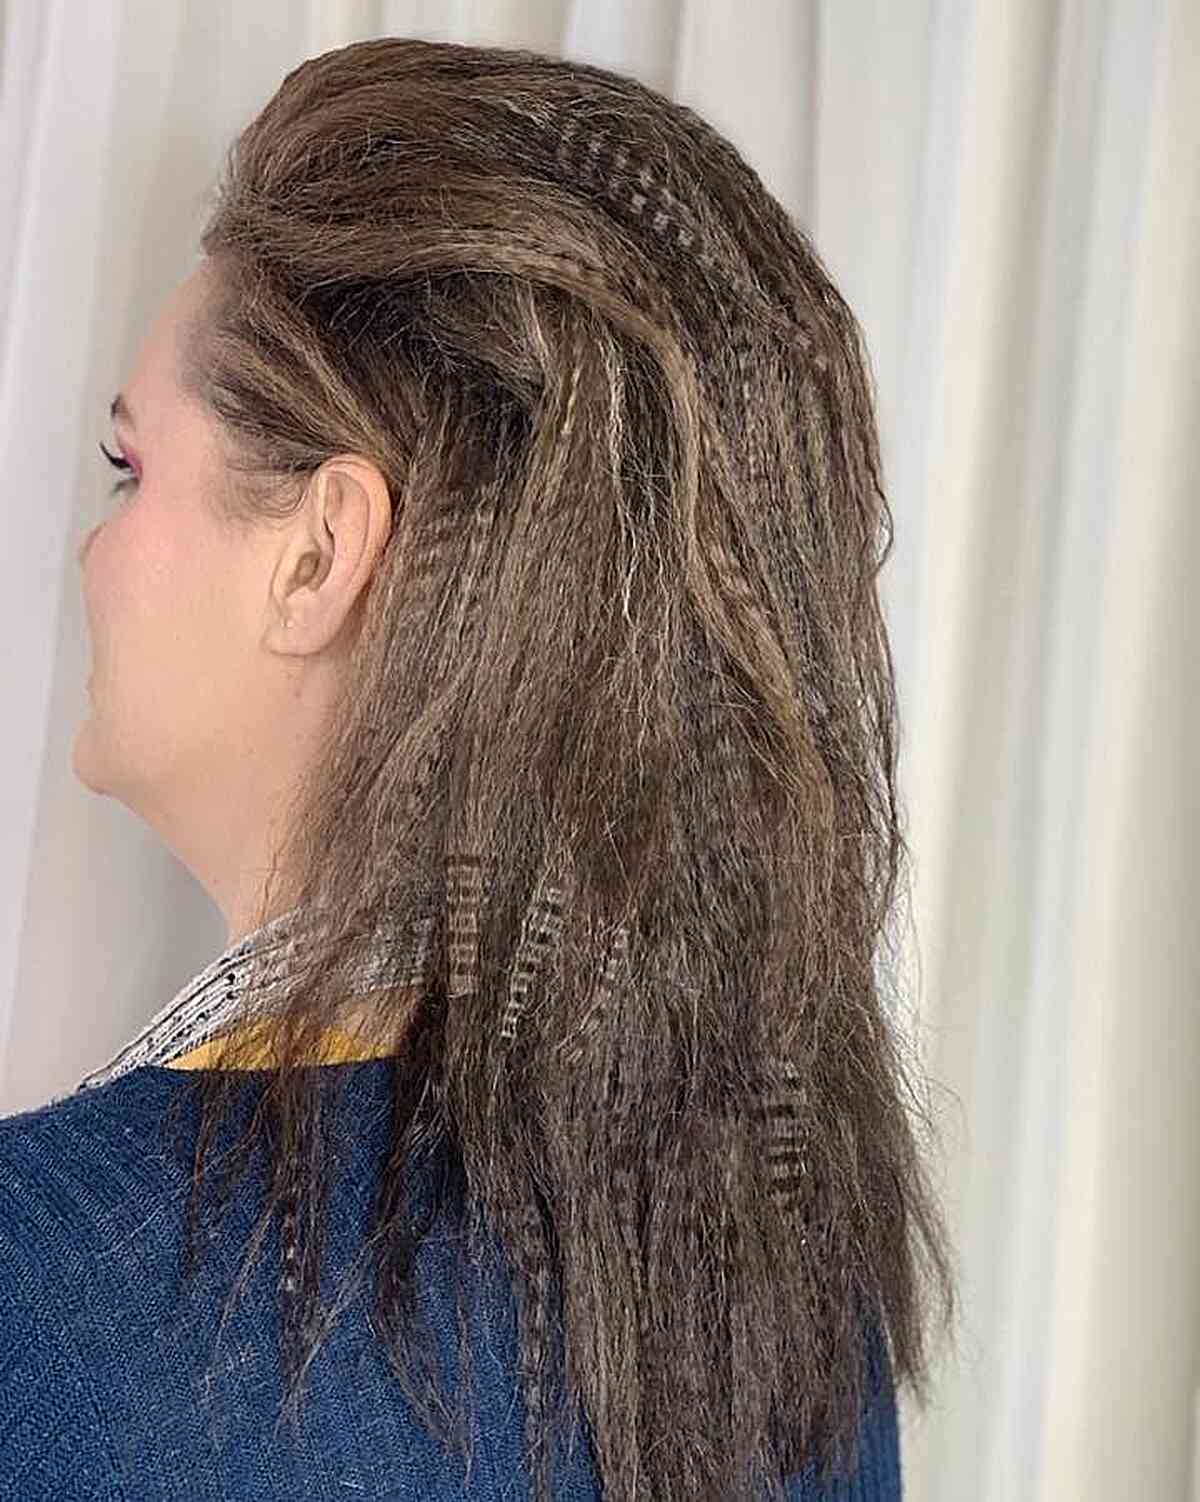 80s-Inspired Soft Tousled Crimped Style for Mid-Length Hair